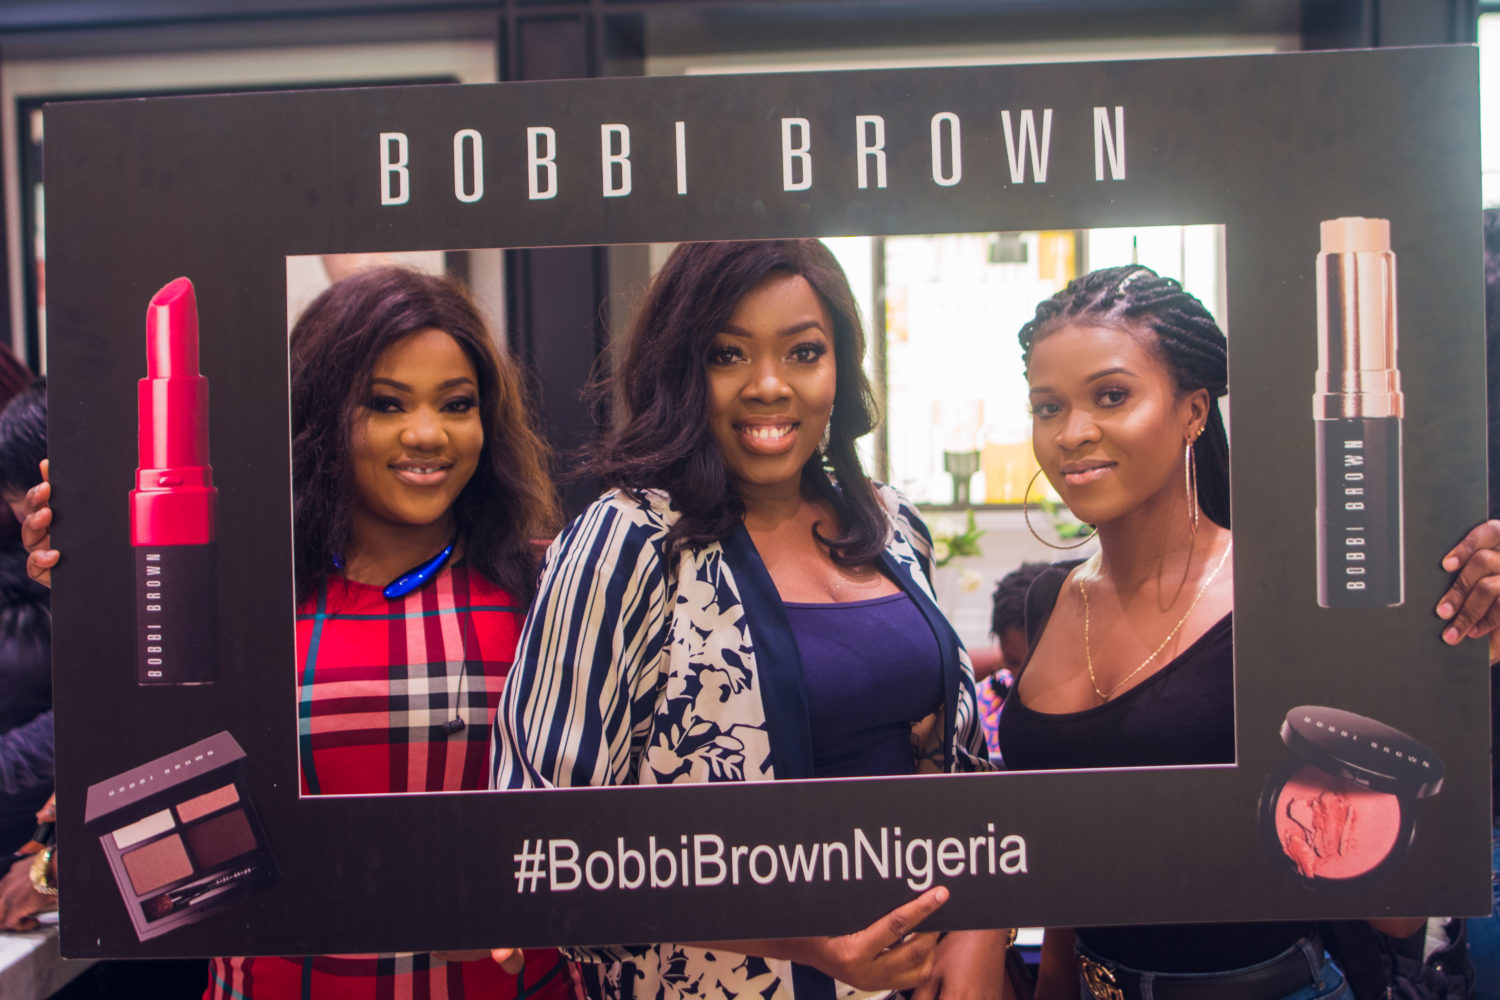 See All The FOMO-Inducing Moments From The Bobbi Brown Beauty Hangout!